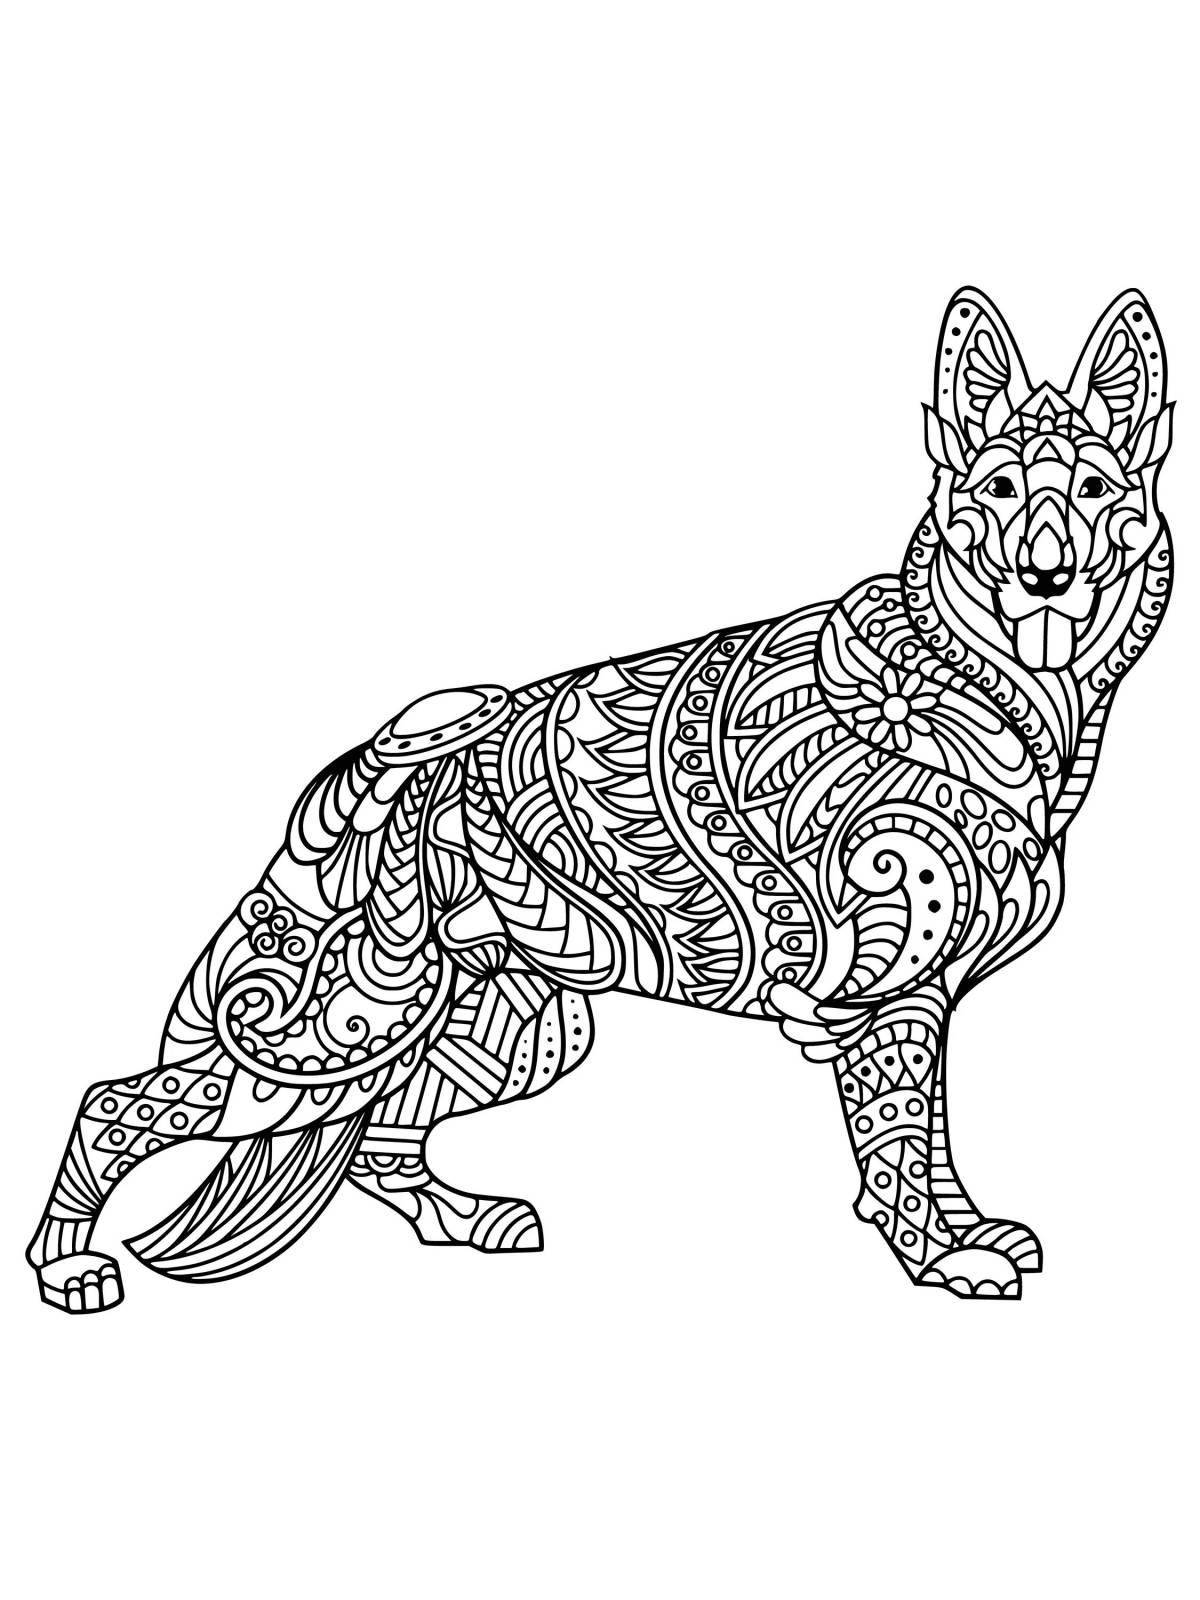 Creative patterned dog coloring book